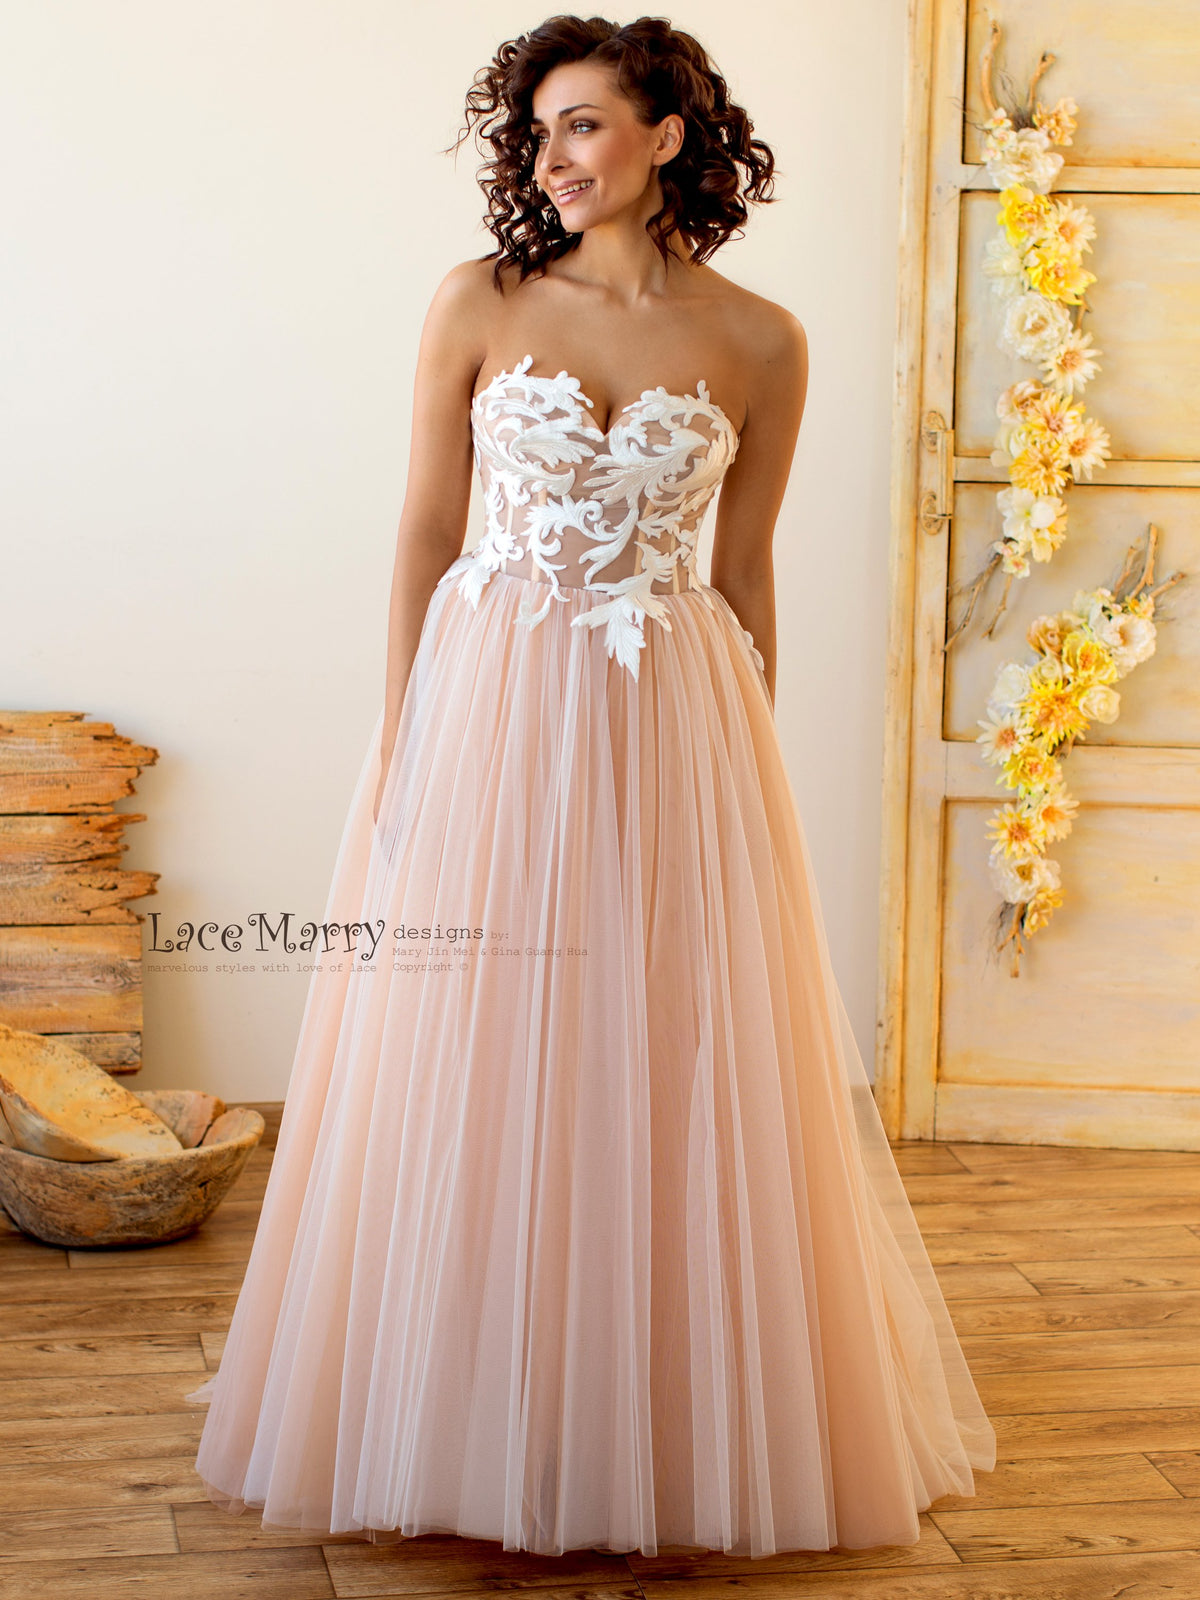 3/4 Sleeve Scalloped Lace Pastel Pink Tulle Bridal Gown - VQ